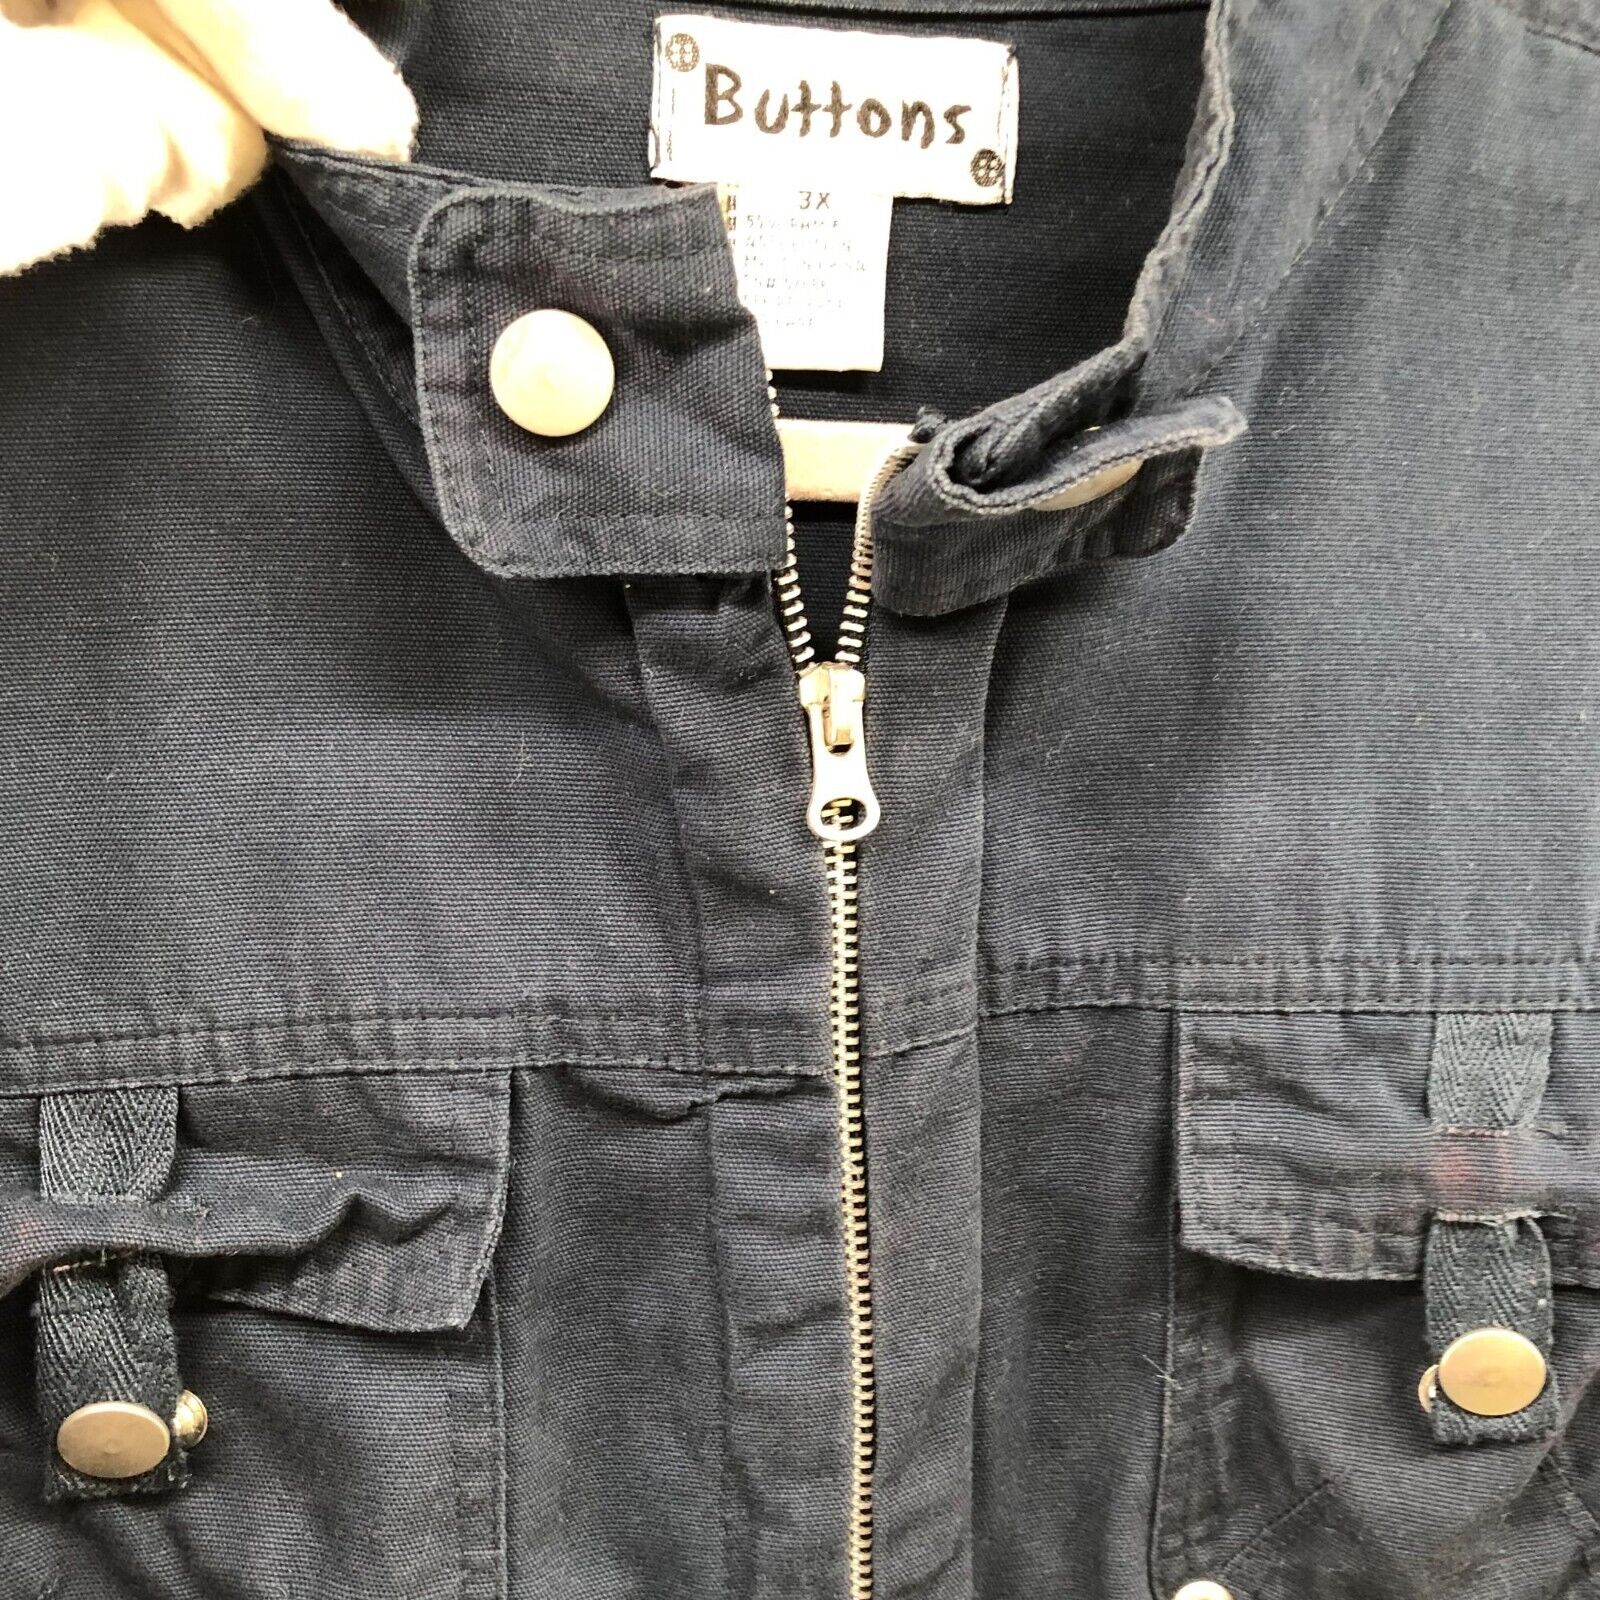 Vintage BUTTONS Utility Jacket Military Boxy Navy… - image 12